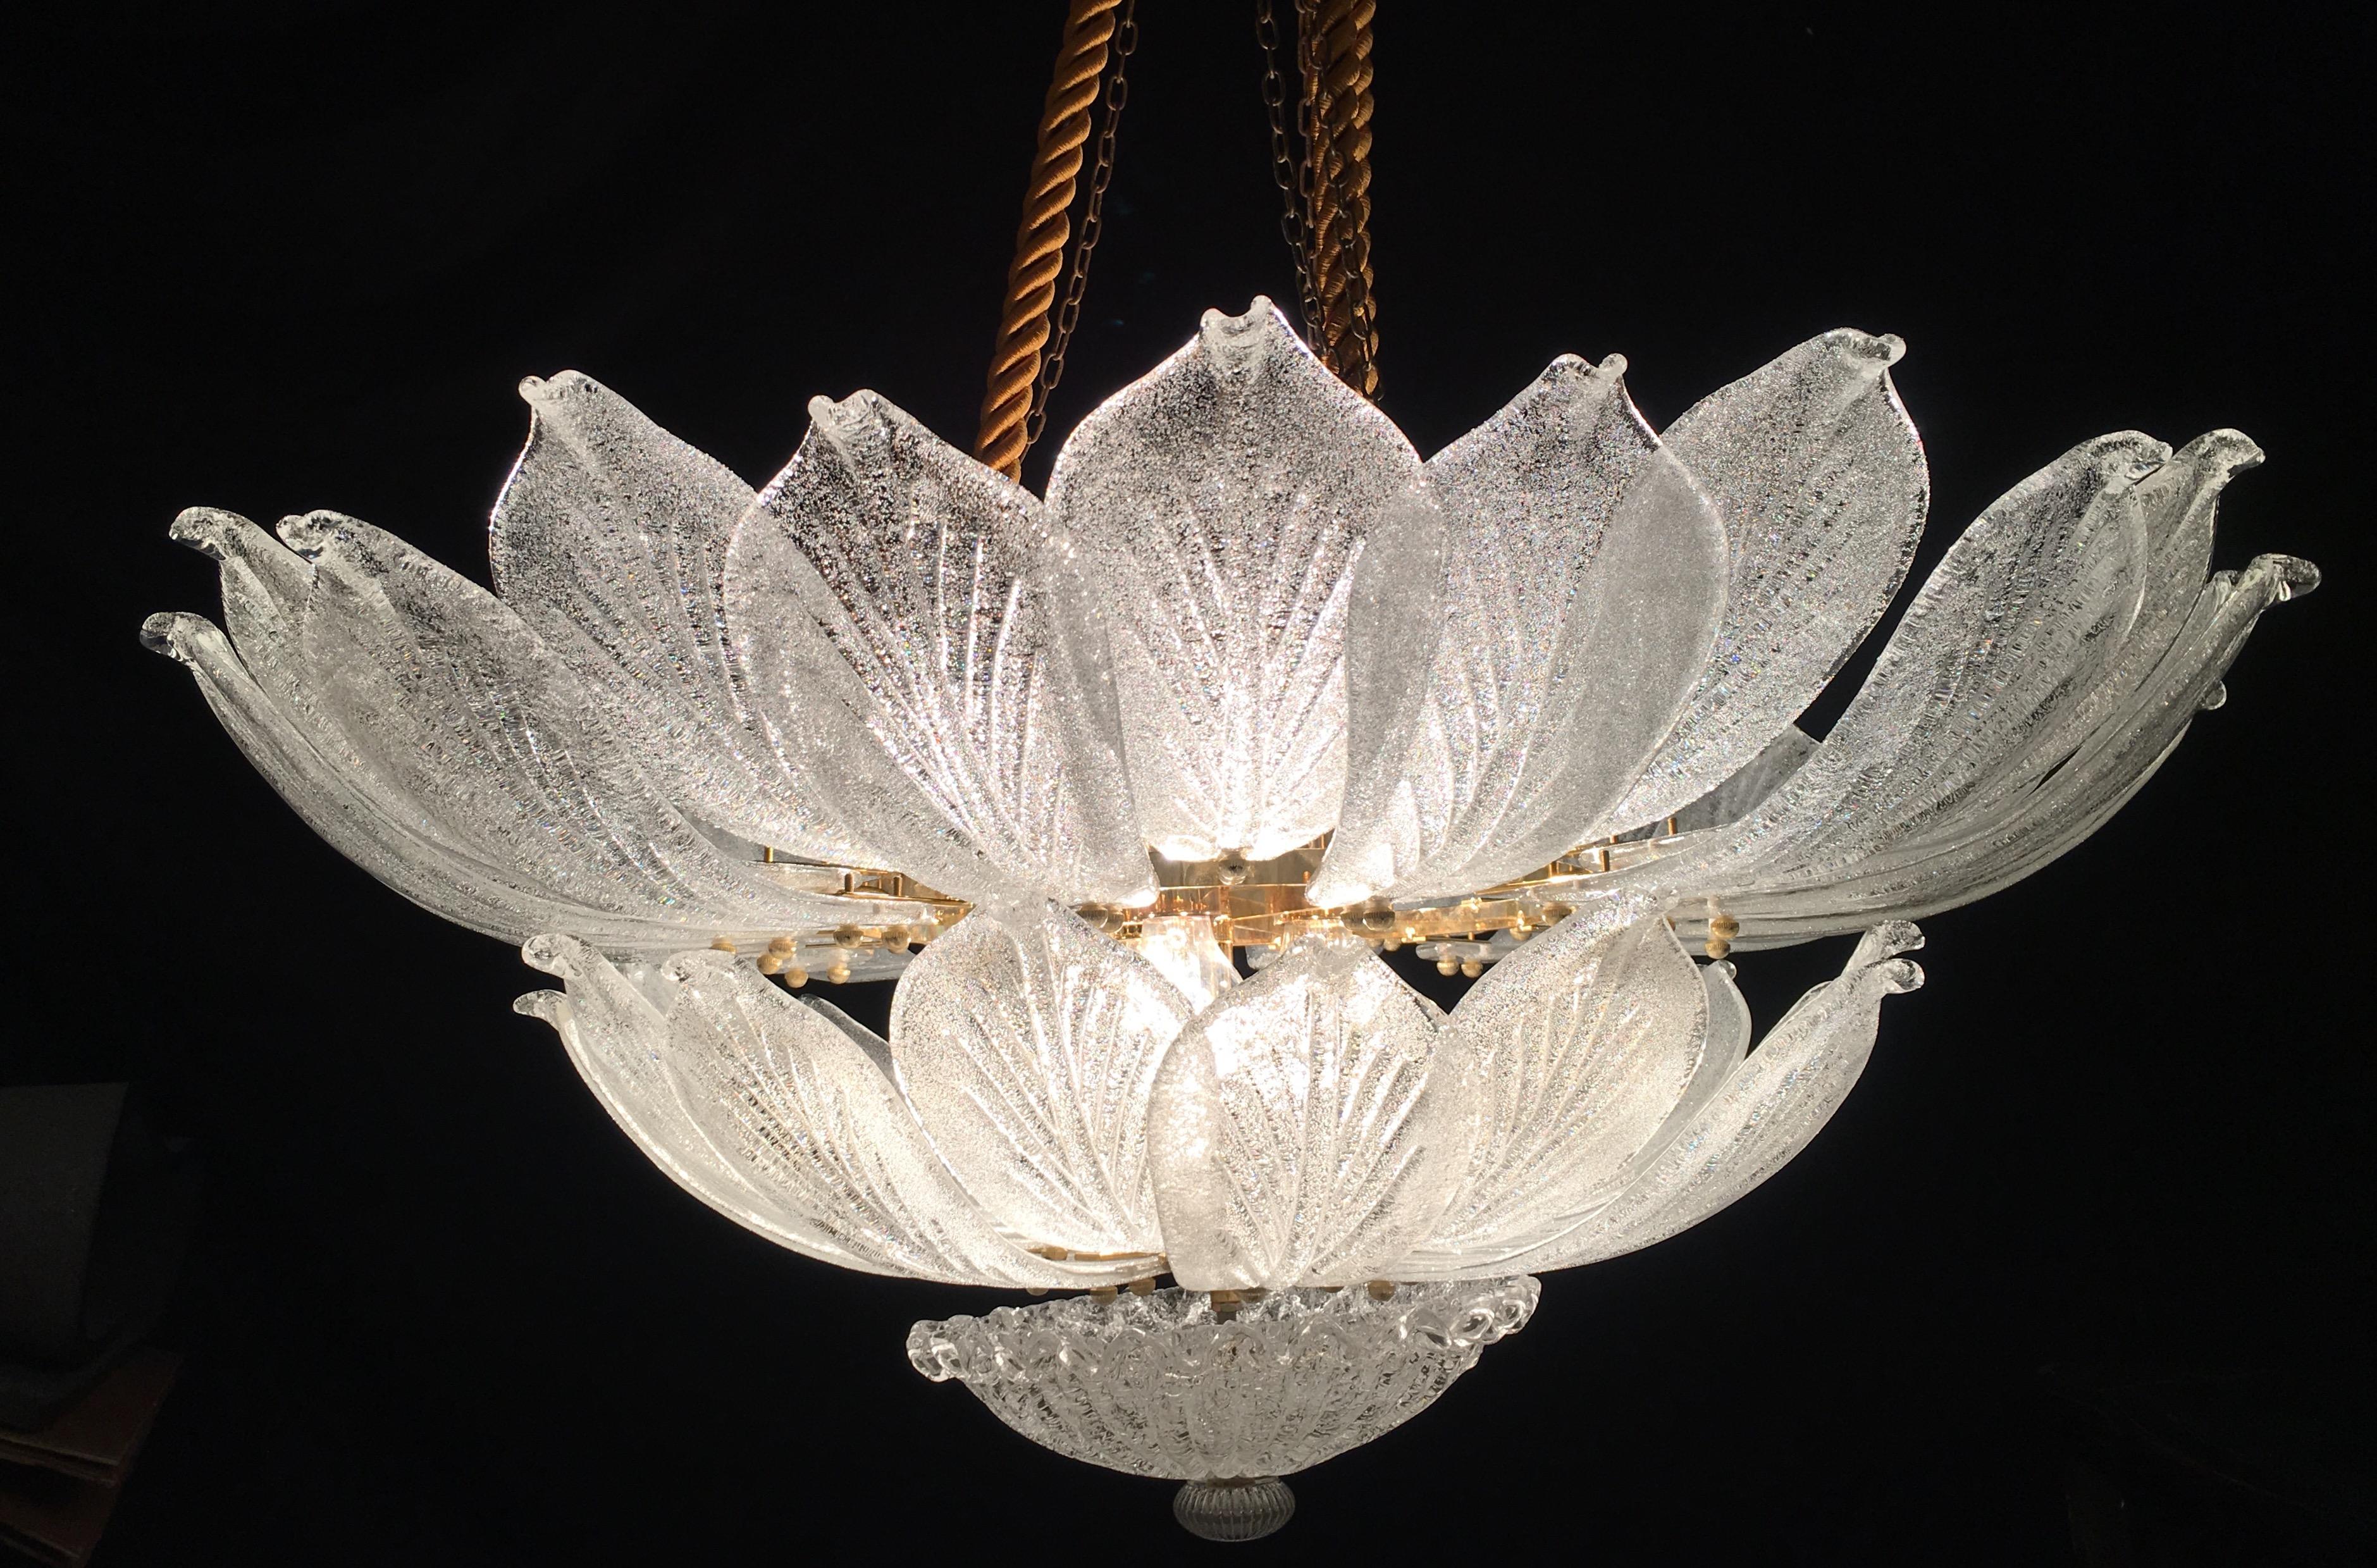 This striking ceiling light is realized in pure Murano glass, each chandelier consists of an incredible number of leaves with gold intrusion.
Gold-plated frame with 12 E 27 bulbs spread a magical light.
Available also a pair.
By Galleria